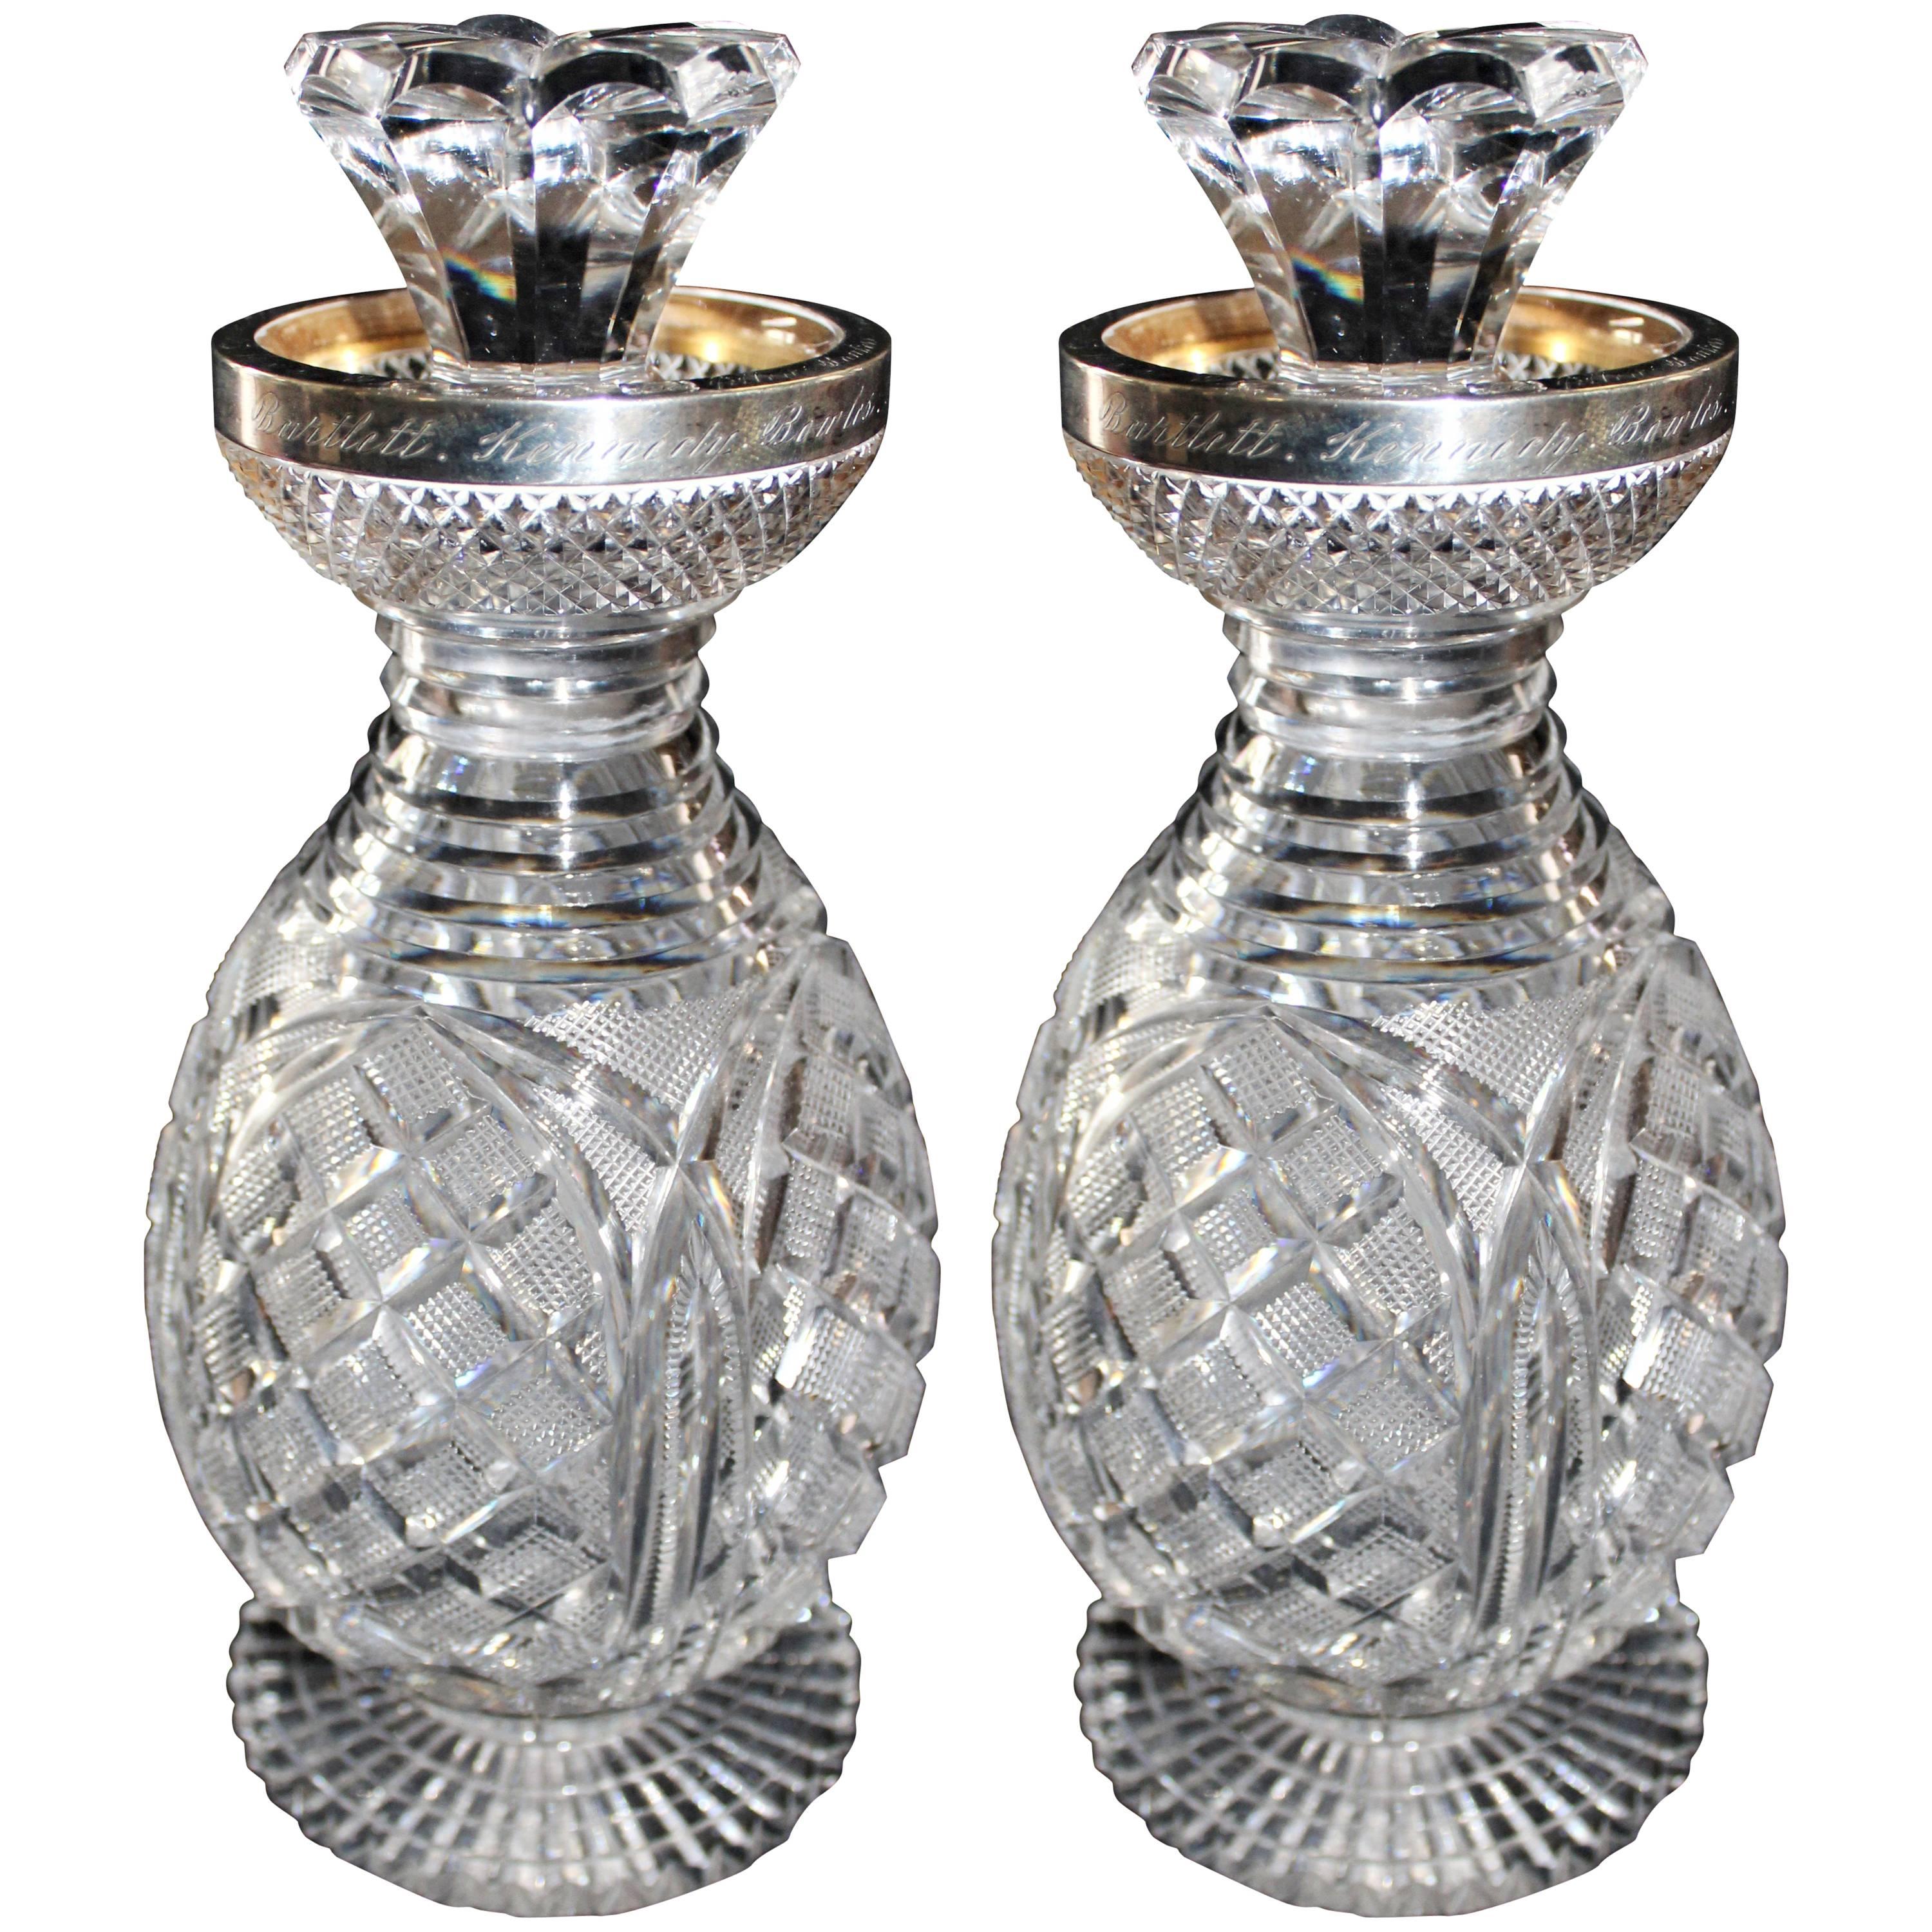 Pair of Cut Crystal and Sterling Silver Decanters, 1900, Birmingham England